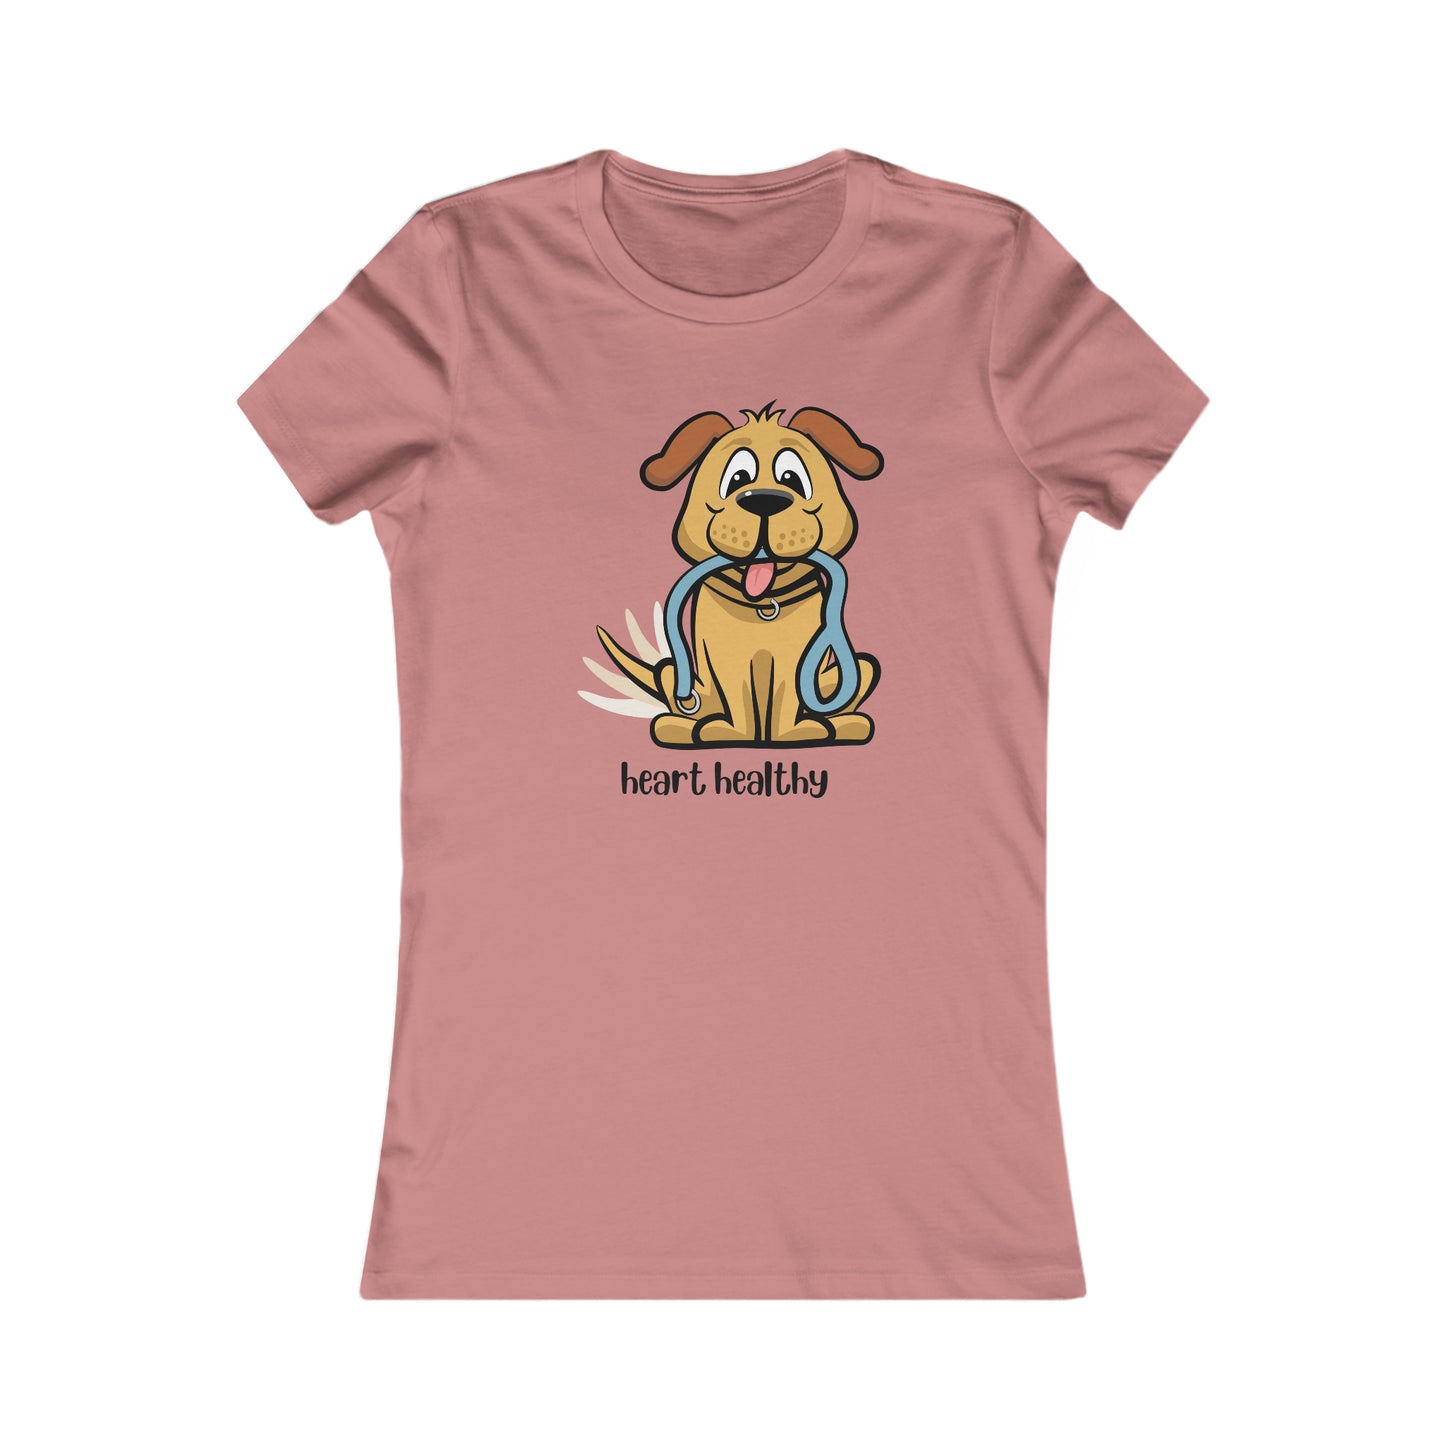 Dog walks have a positive impact on our health, that is a fact.  “heart healthy” is only one of the ways our dogs make us healthy. Women's Favorite Tee in several colors for you to choose from. Slim fit so please check the size table.